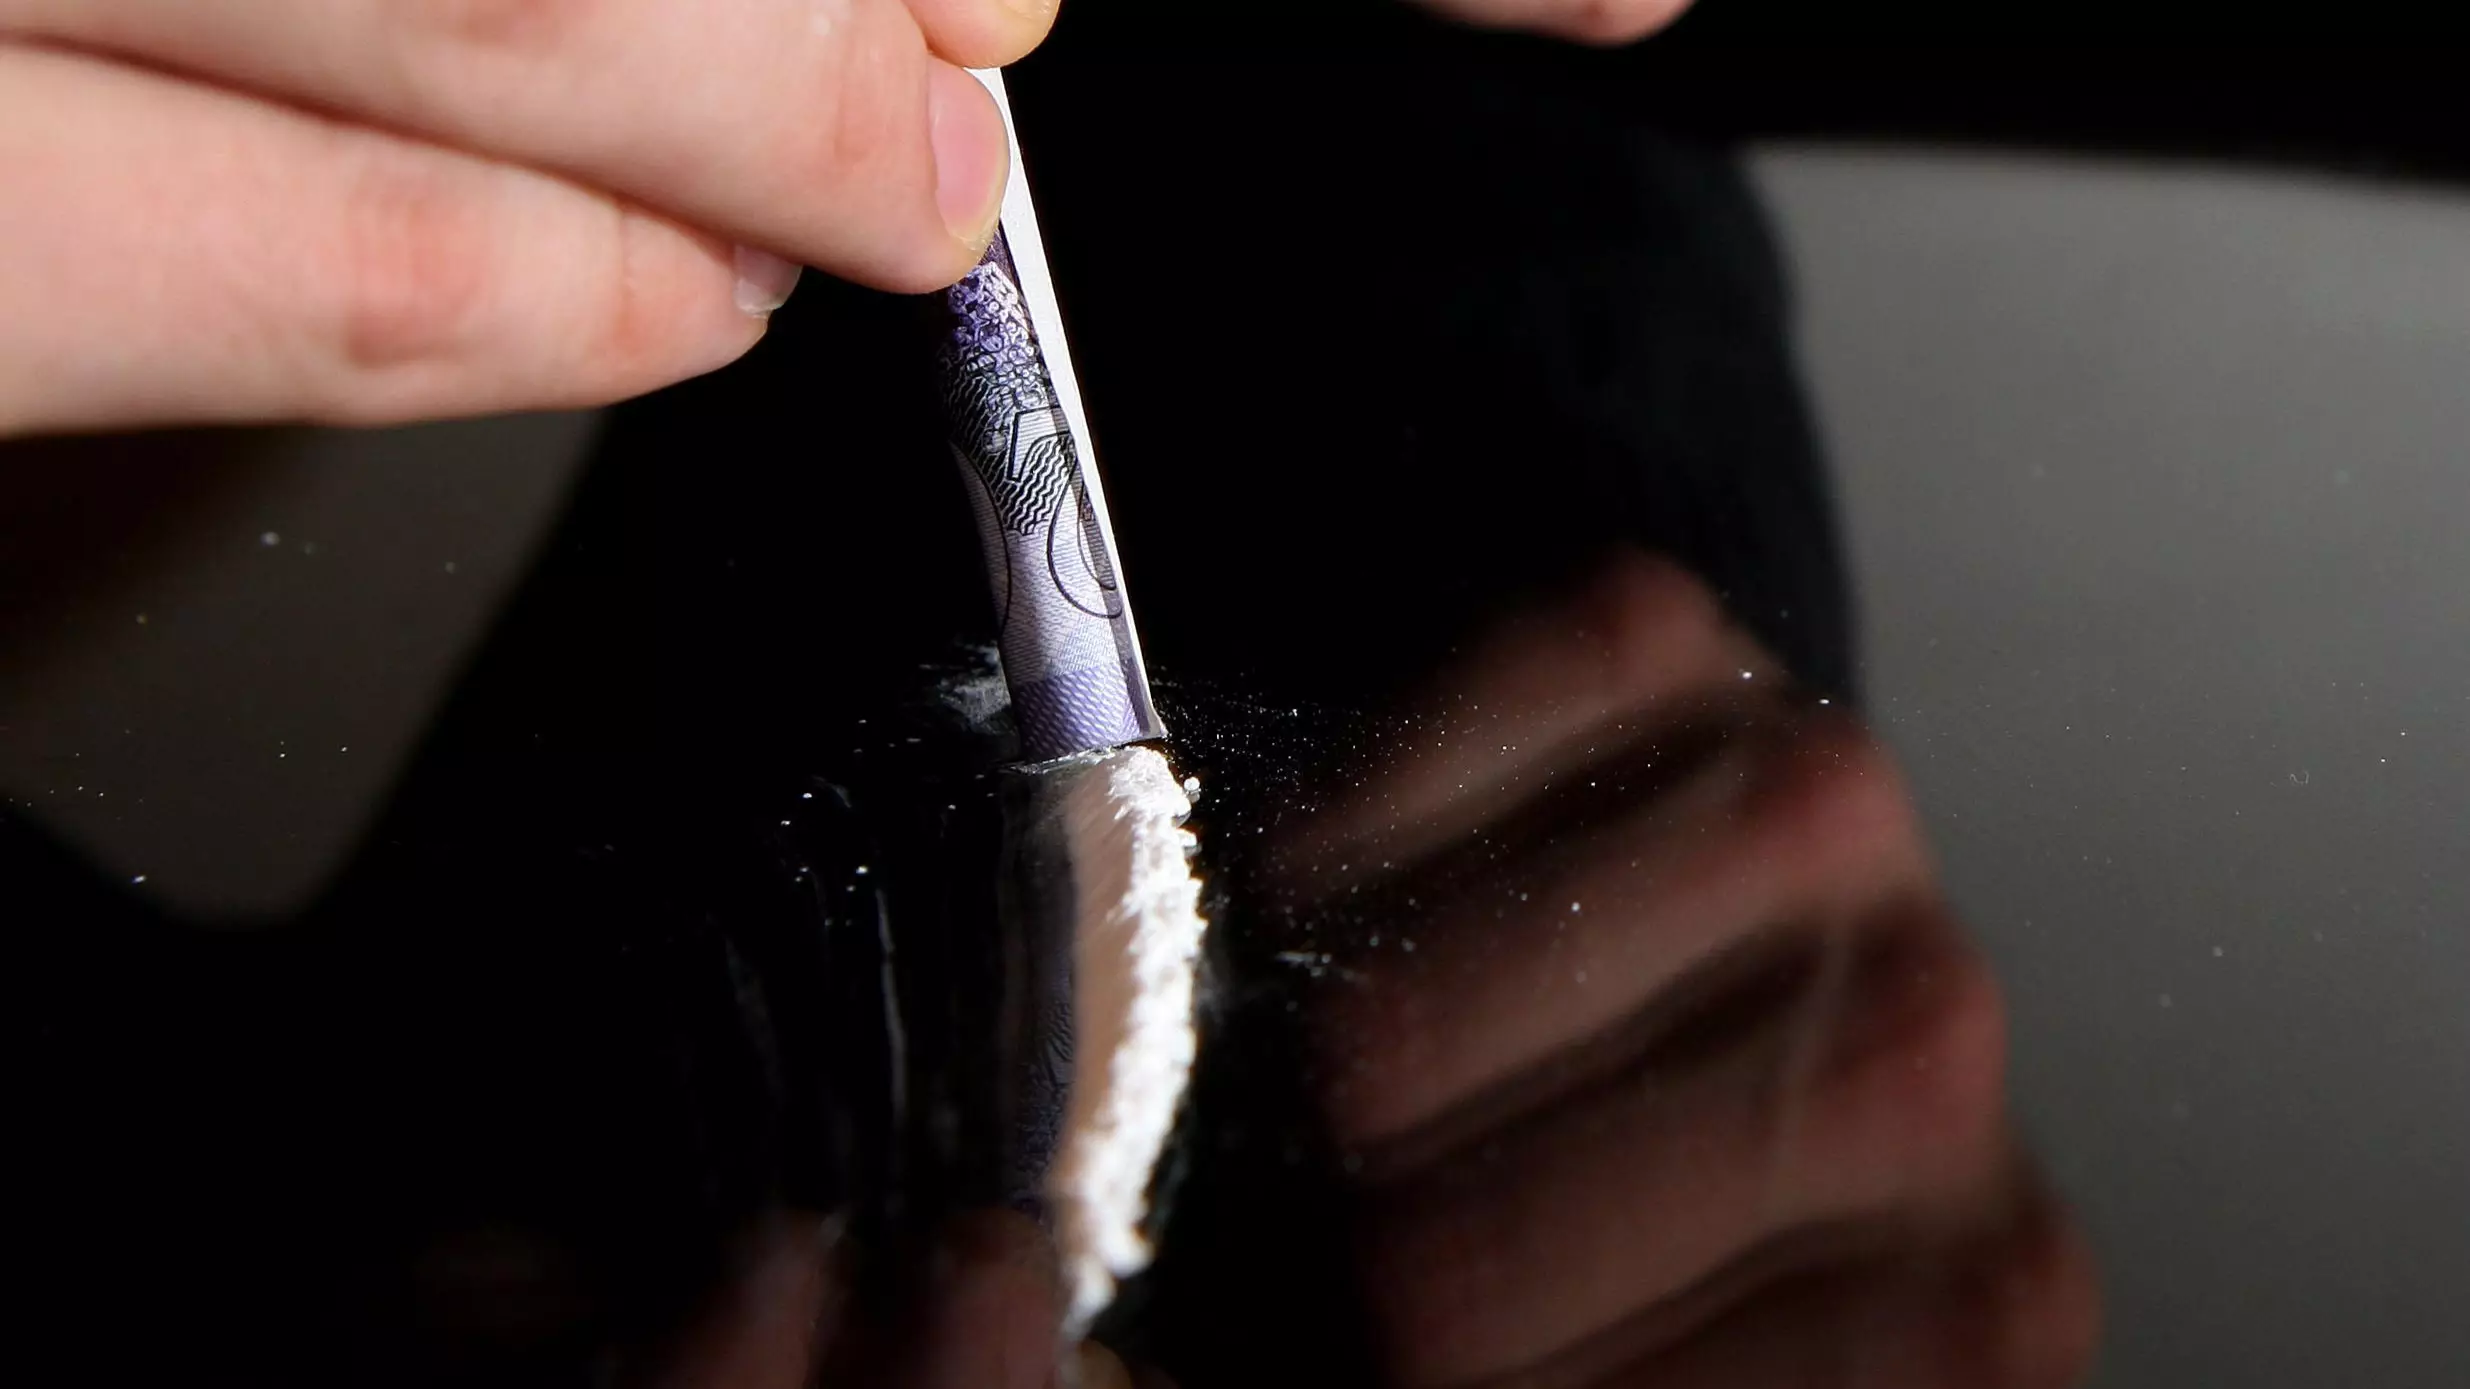 NSW Health Issues Grim Warning About Cocaine After Two People Died